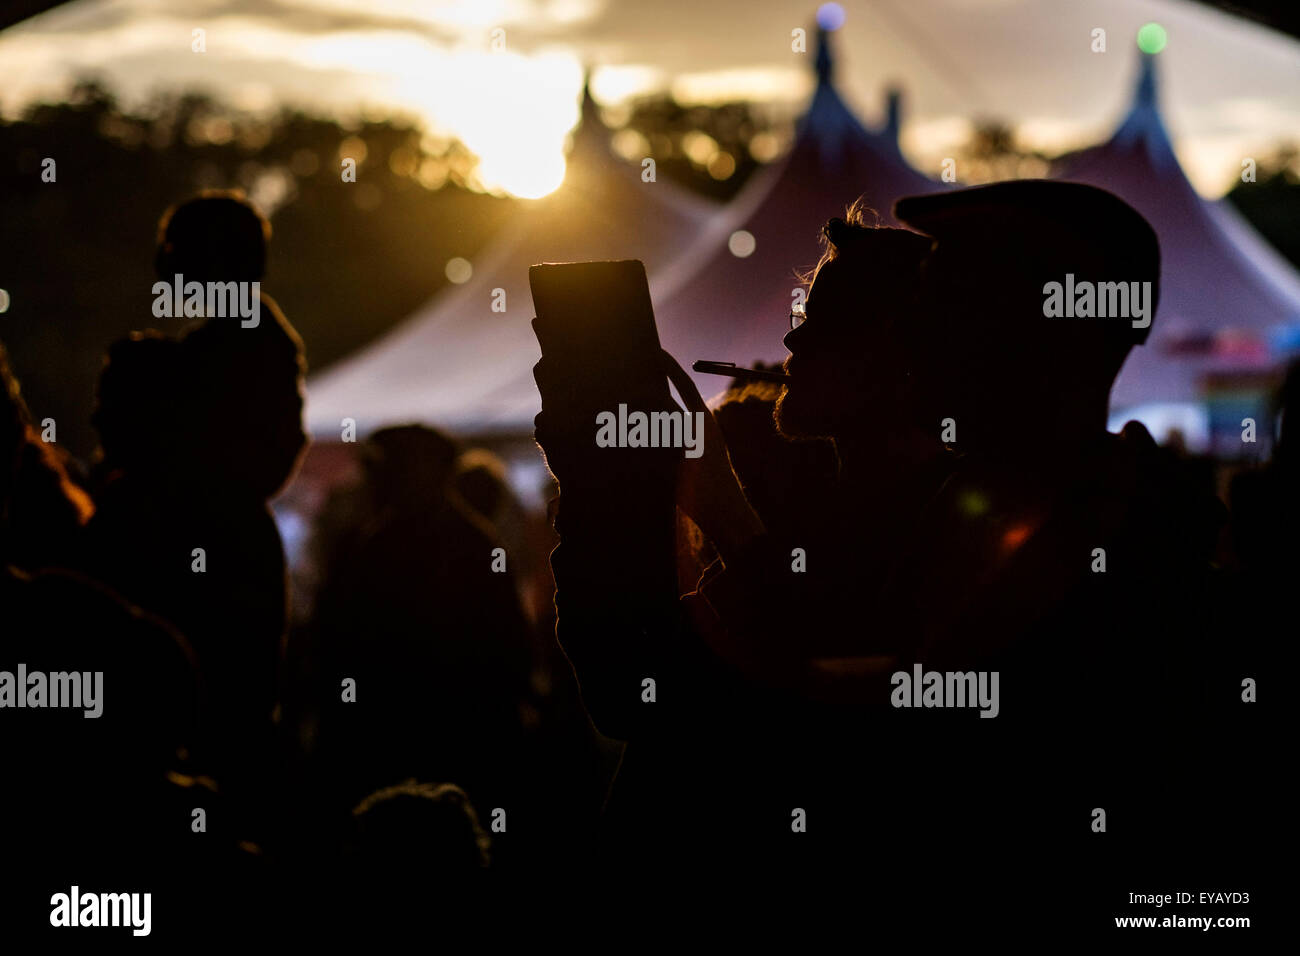 Atmosphere at WOMAD (World of Music, Arts and Dance)  Festival at Charlton Park on 25/07/2015 at Charlton Park, Malmesbury.  Festival goers relax in the Bowers & Wilkins stage tent bathed in the light of the sunset. Taking pictures on an iPad / Tablet Picture by Julie Edwards/Alamy Live News Stock Photo